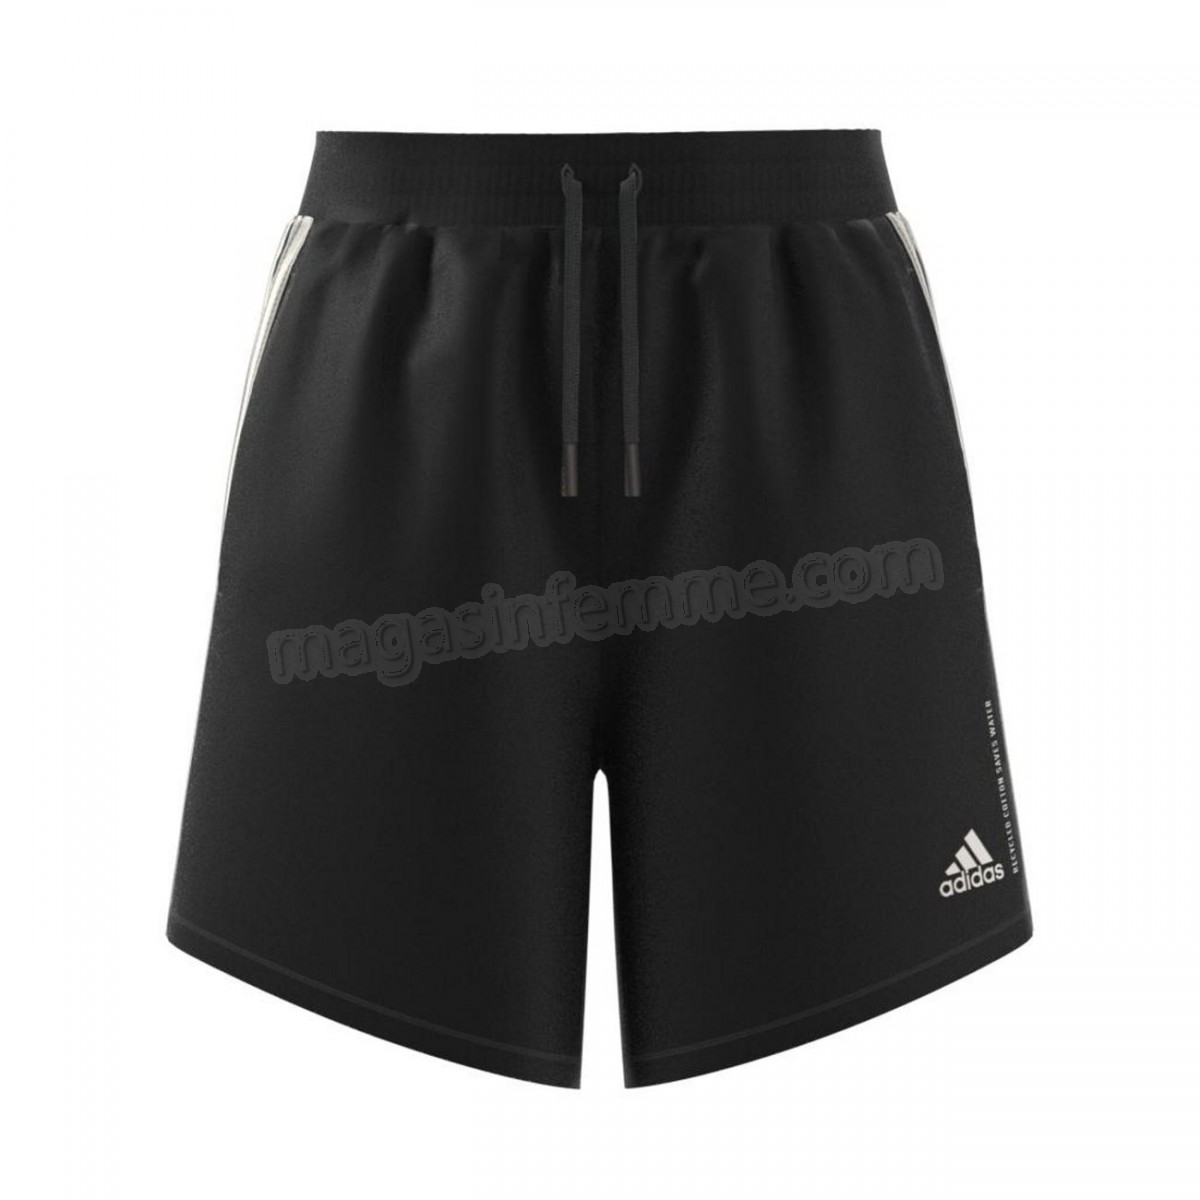 Adidas-Fitness femme ADIDAS Short femme adidas Must Haves Recycled Cotton en solde - -6